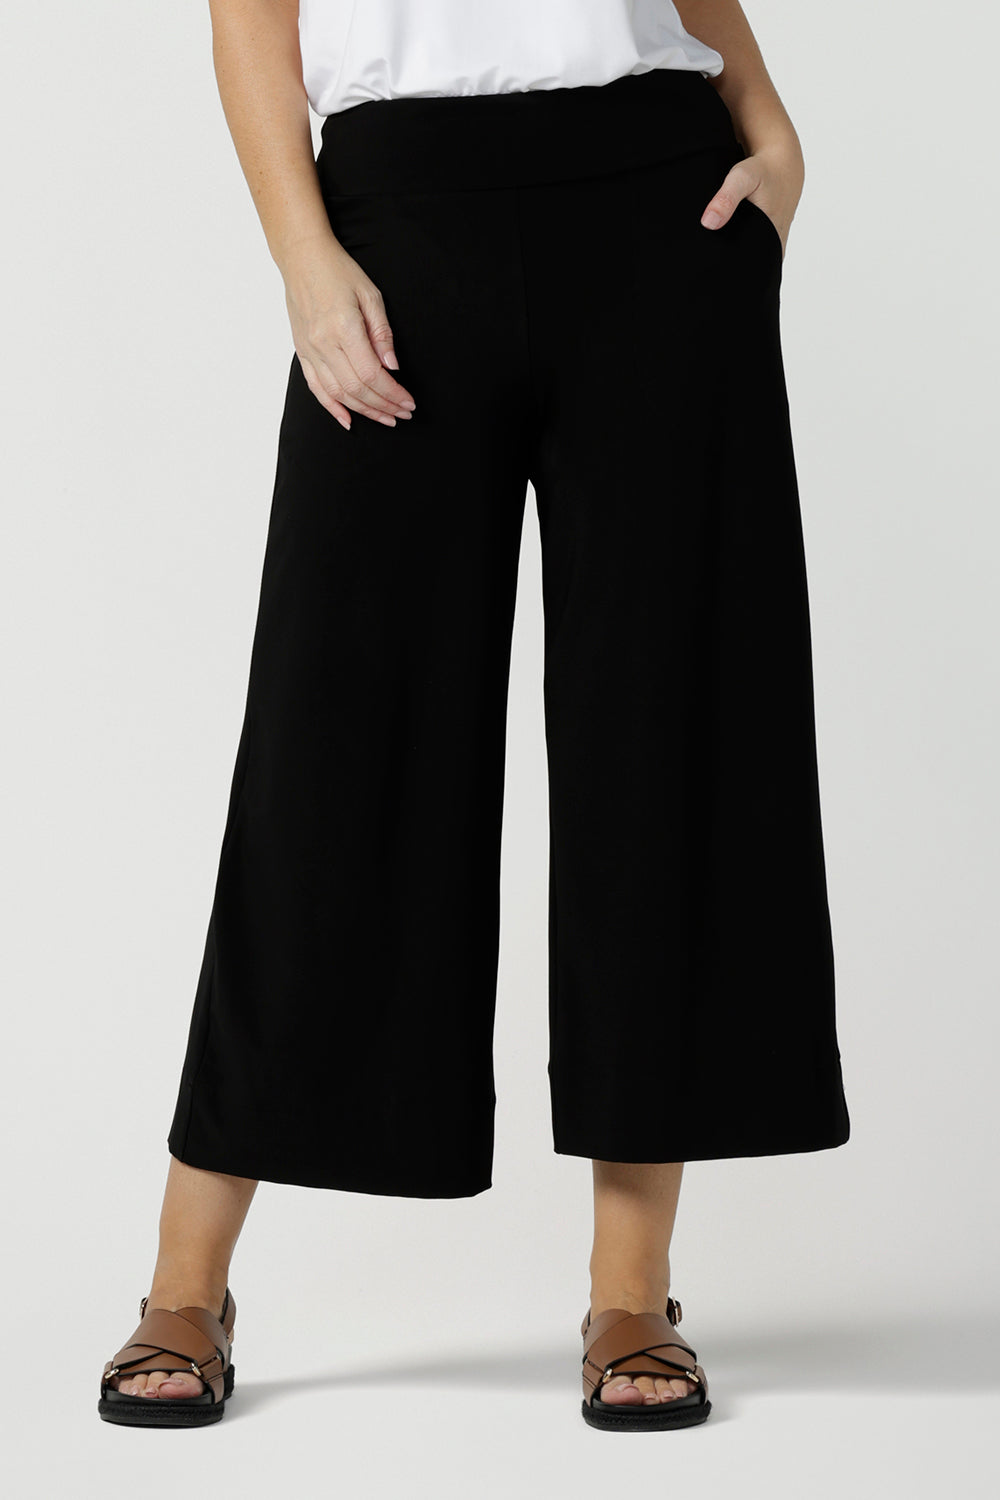 Comfortable, wide leg black culotte pants are worn with a V-neck white bamboo jersey top with short sleeves. Cropped pants with pockets, these pull-on casual trousers are made in Australia by women's clothing brand, Leina & Fleur - size inclusive, shop online in petite, mid size and plus sizes.